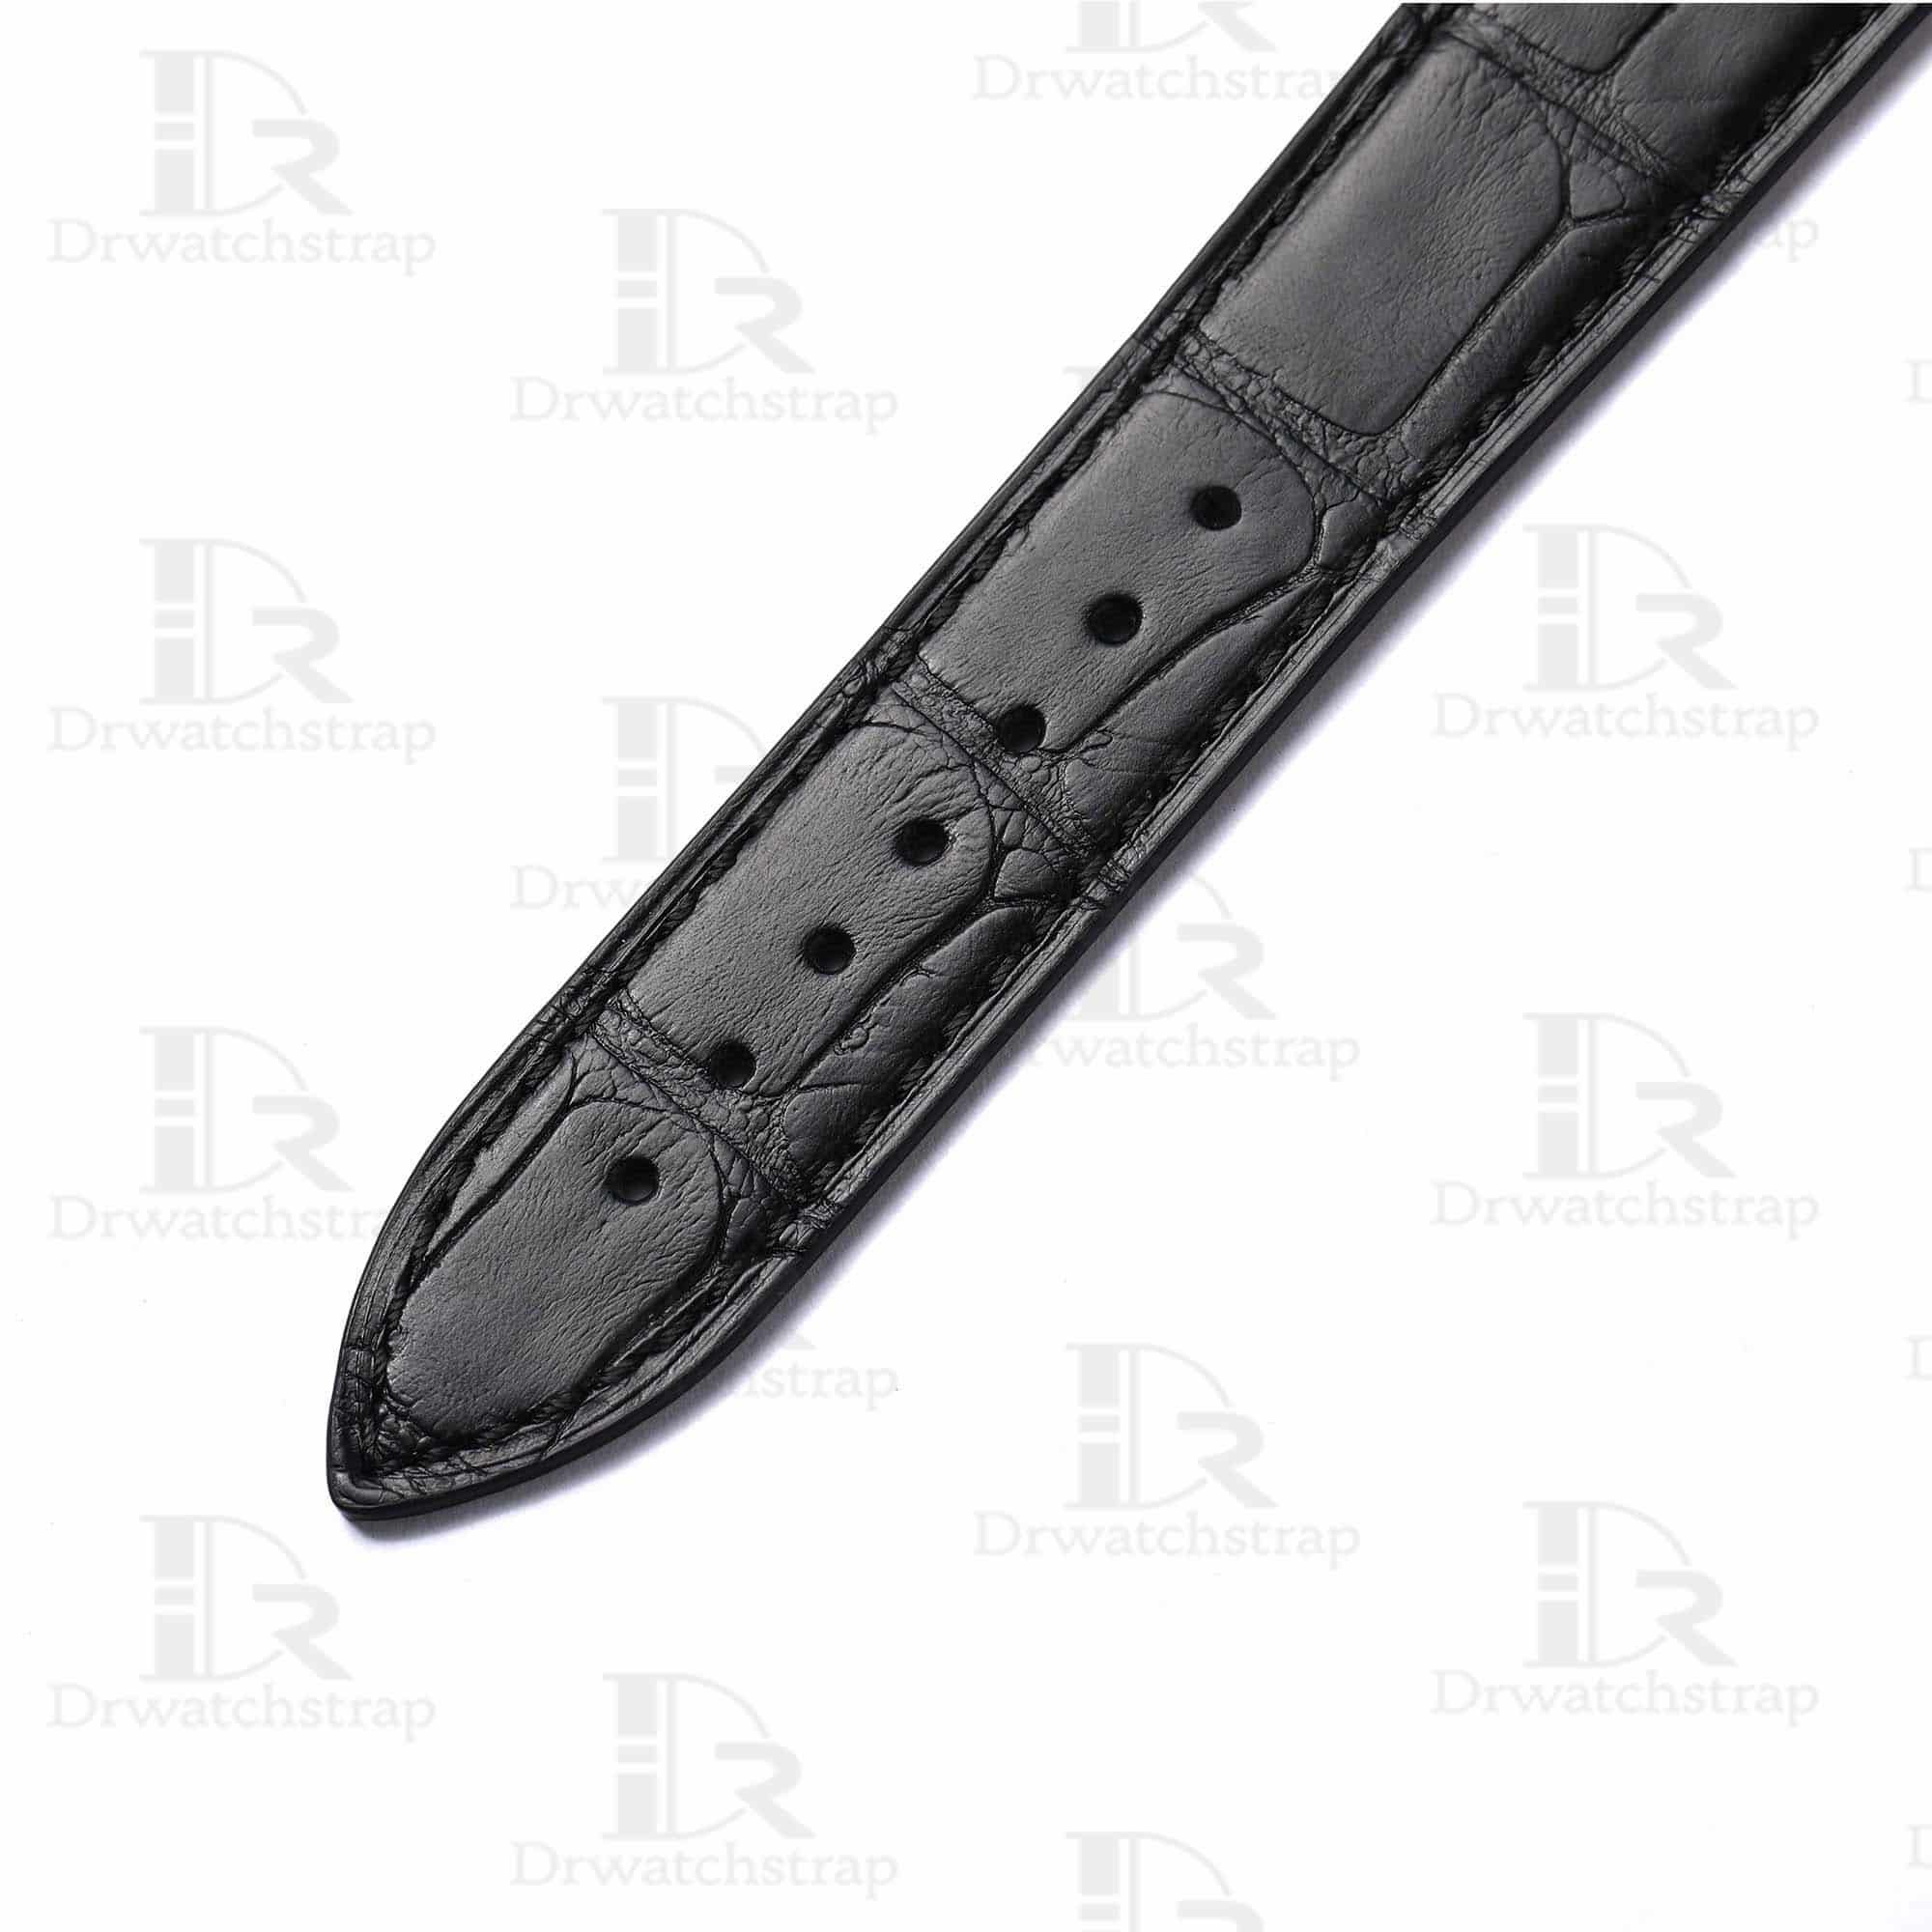 Genuine the best Alligator leather material